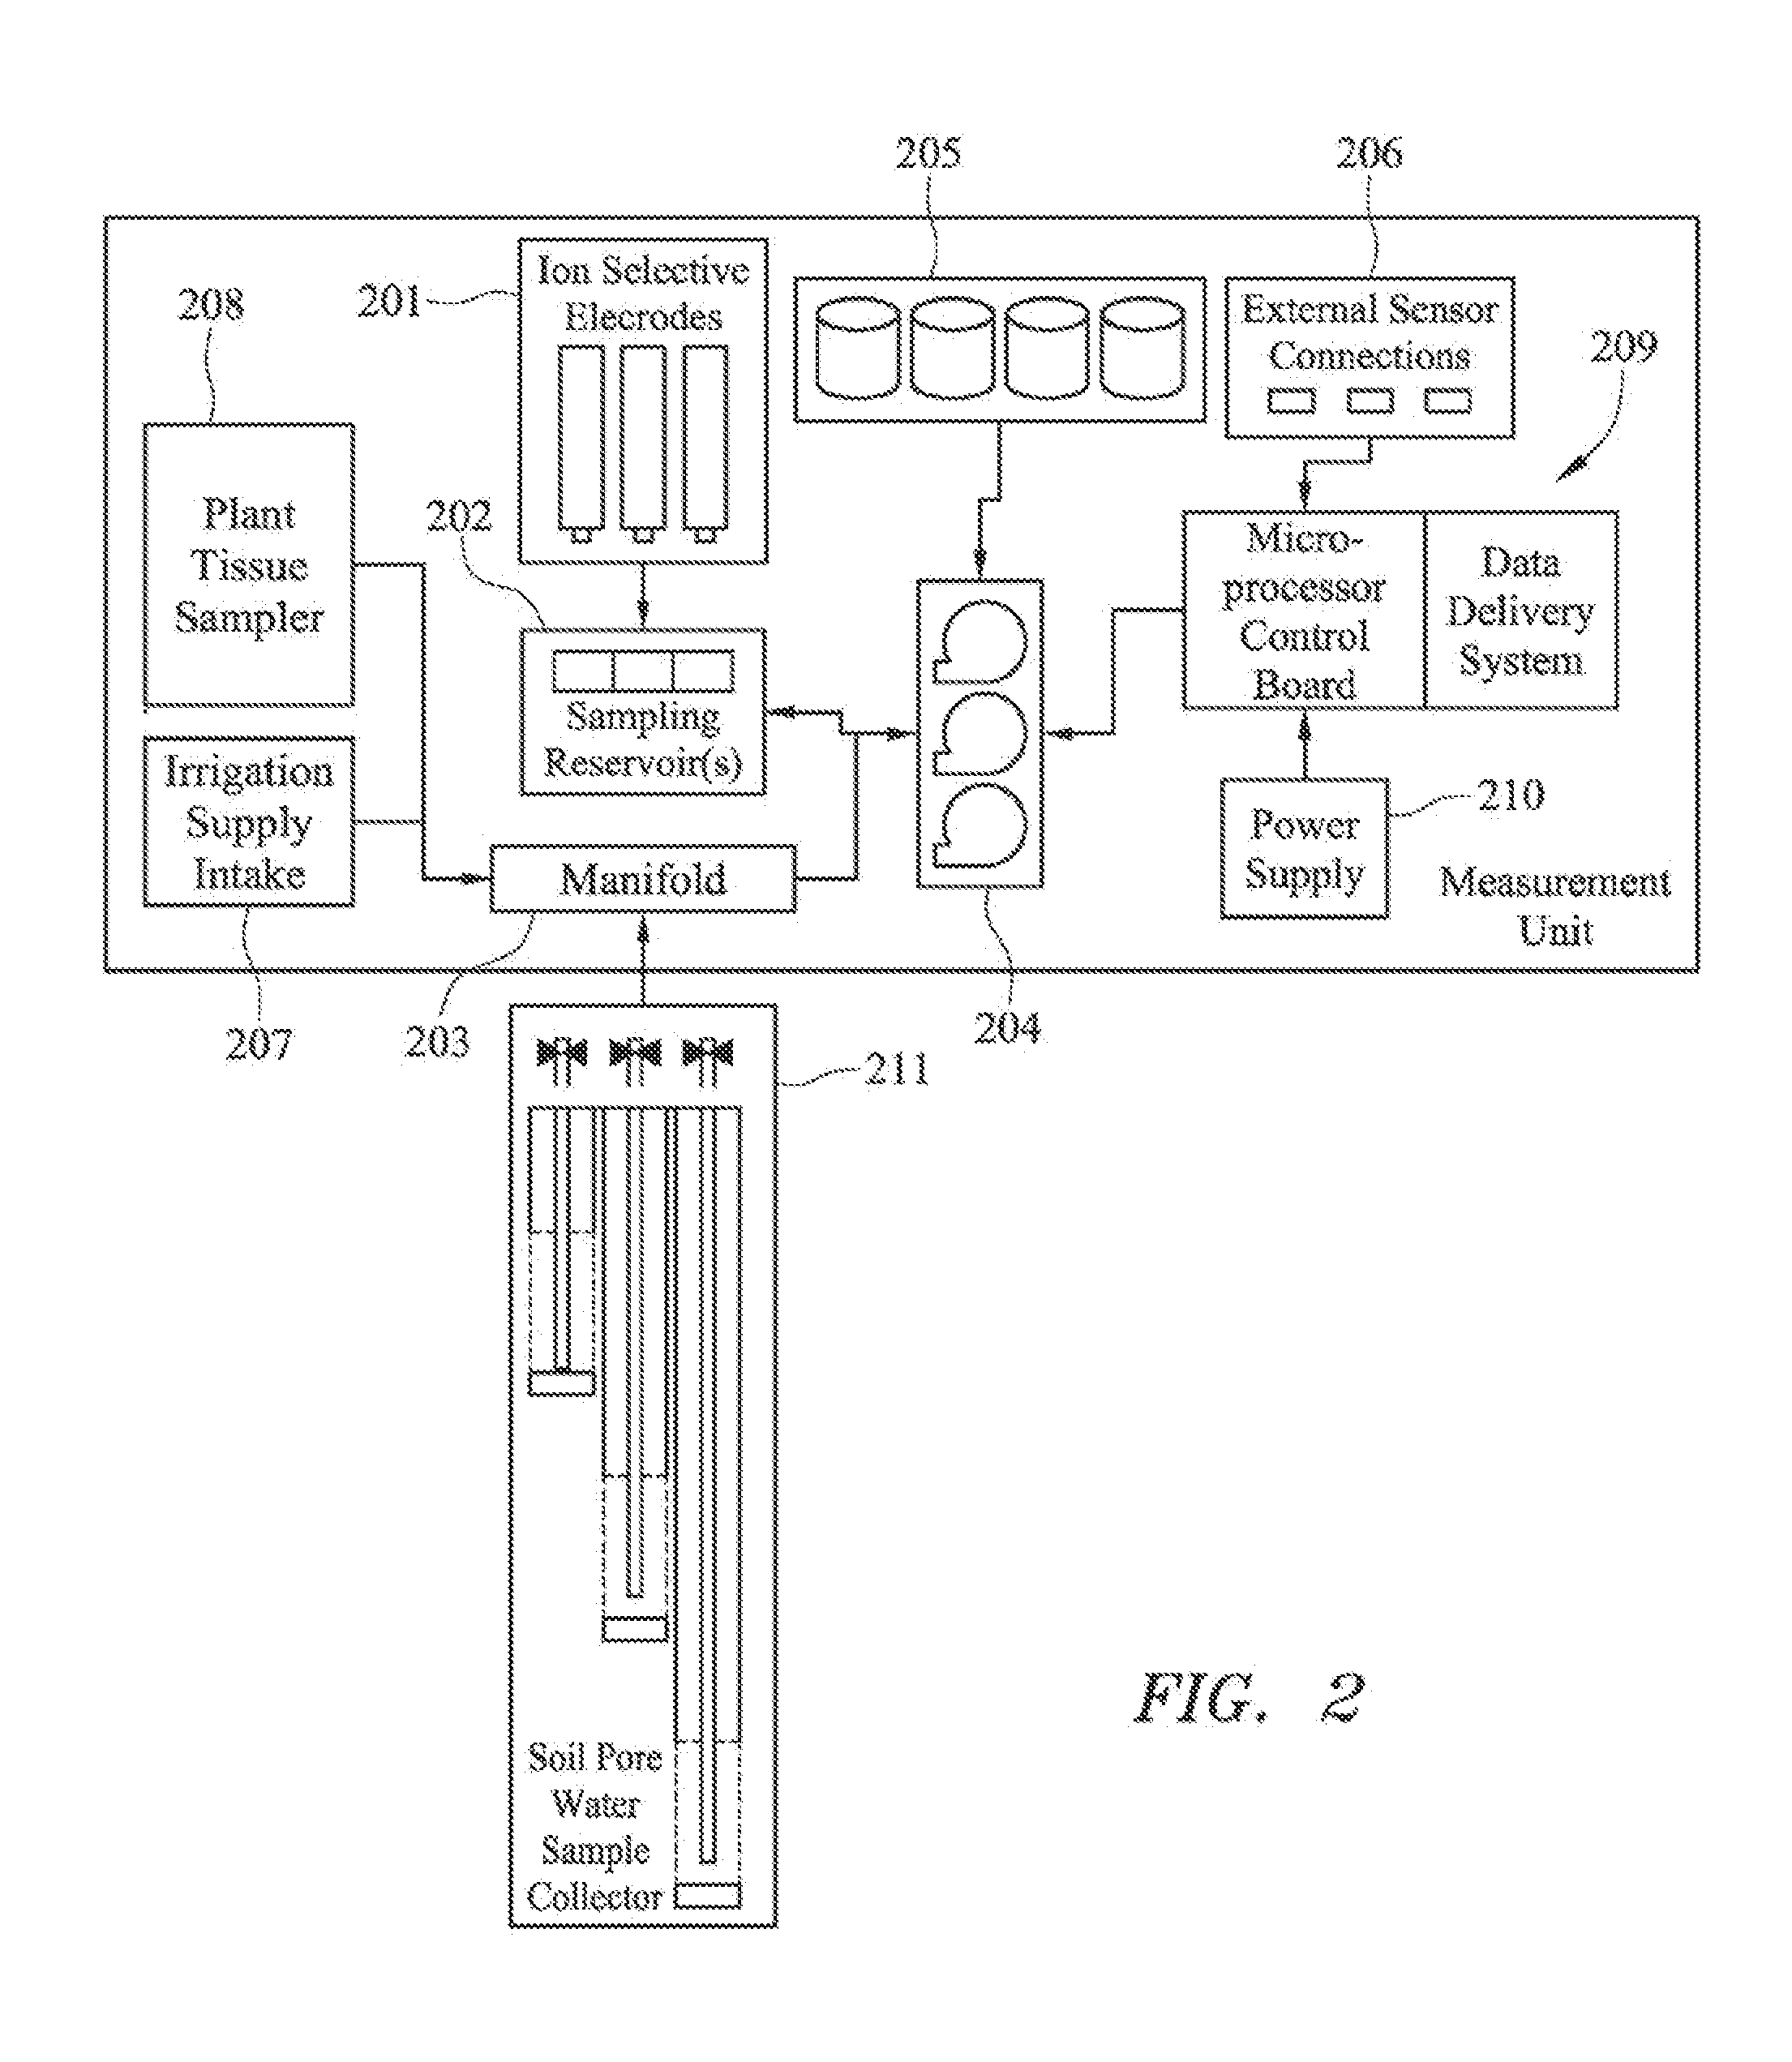 Systems, devices, and methods for environmental monitoring in agriculture